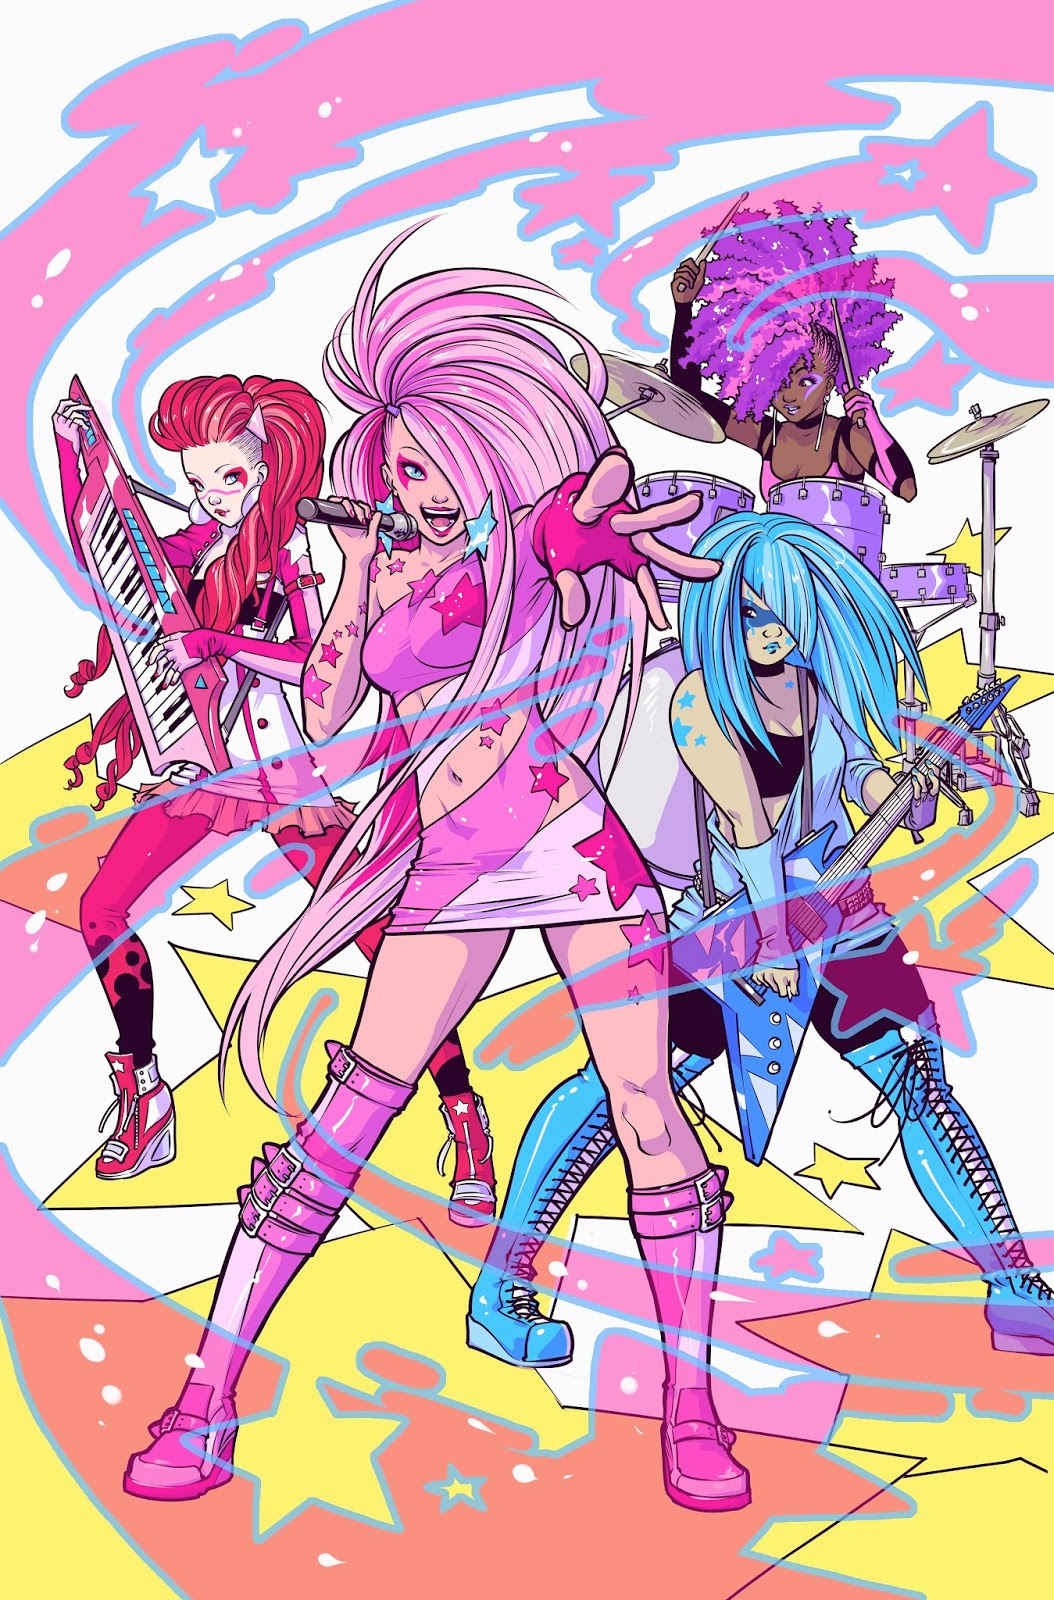 Jem and the Holograms - Receiving a totally outrageous reboot in comic form